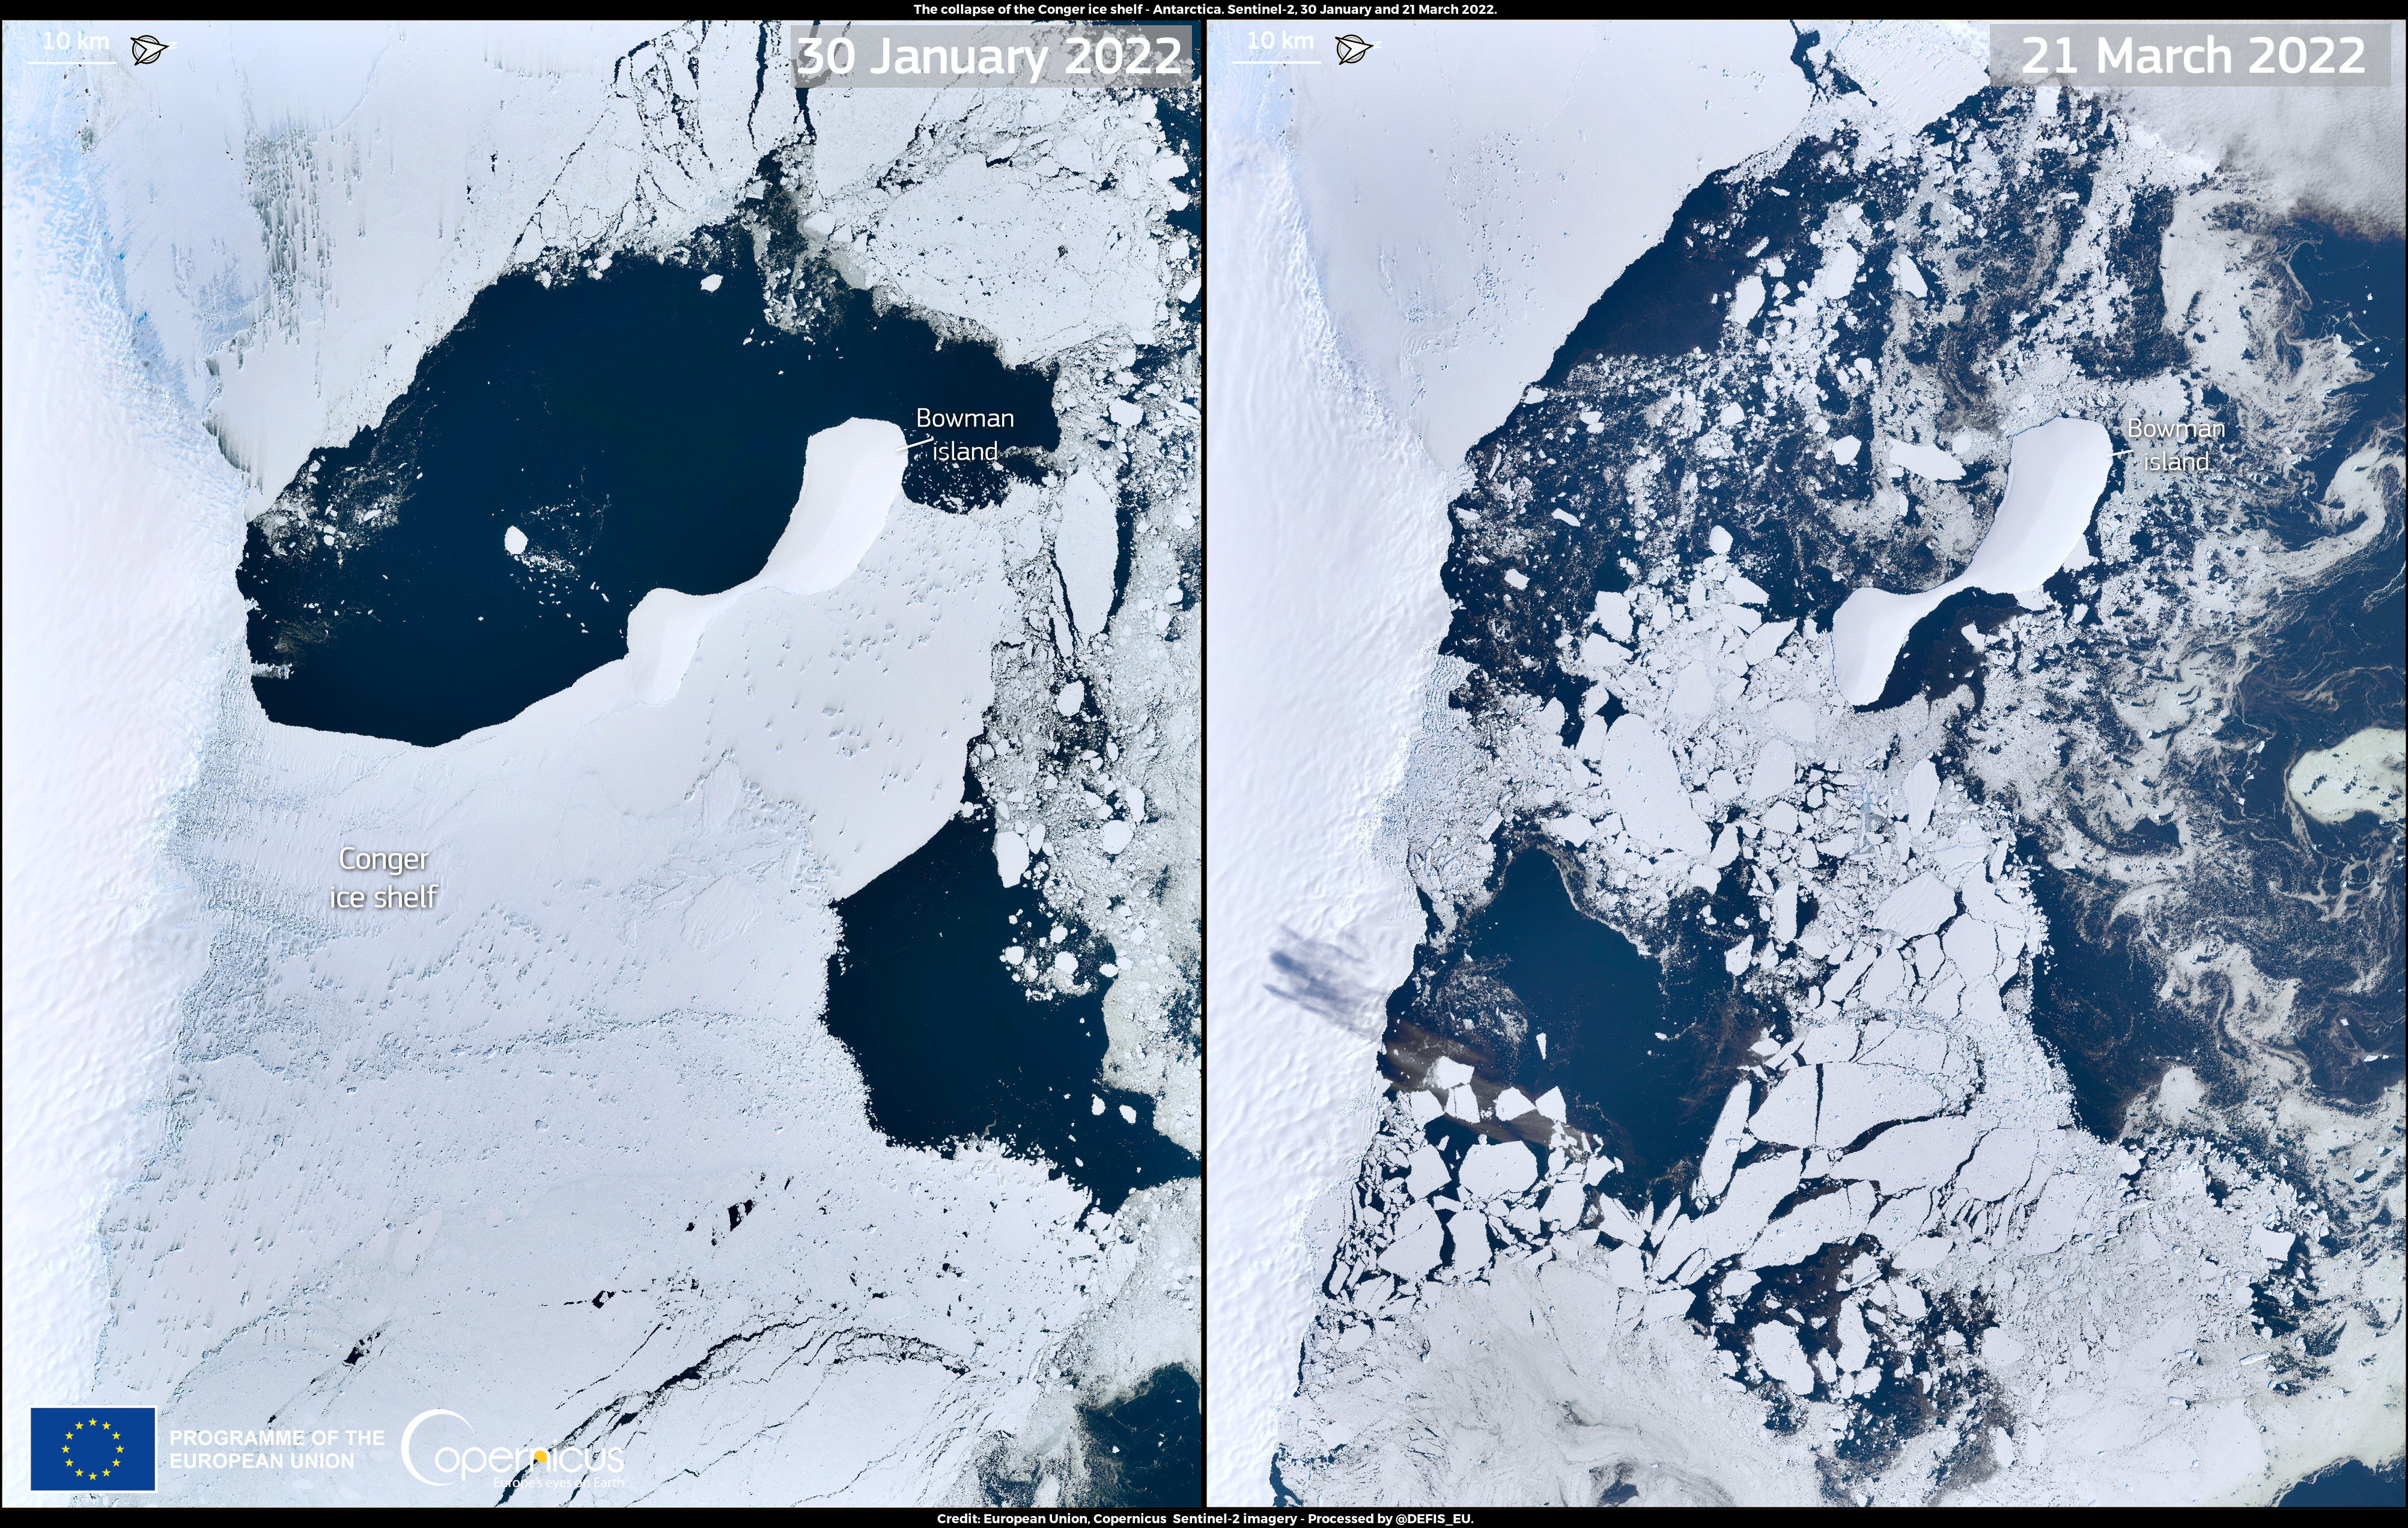 Before and after, the collapse of the Conger ice shelf in the East Antarctic